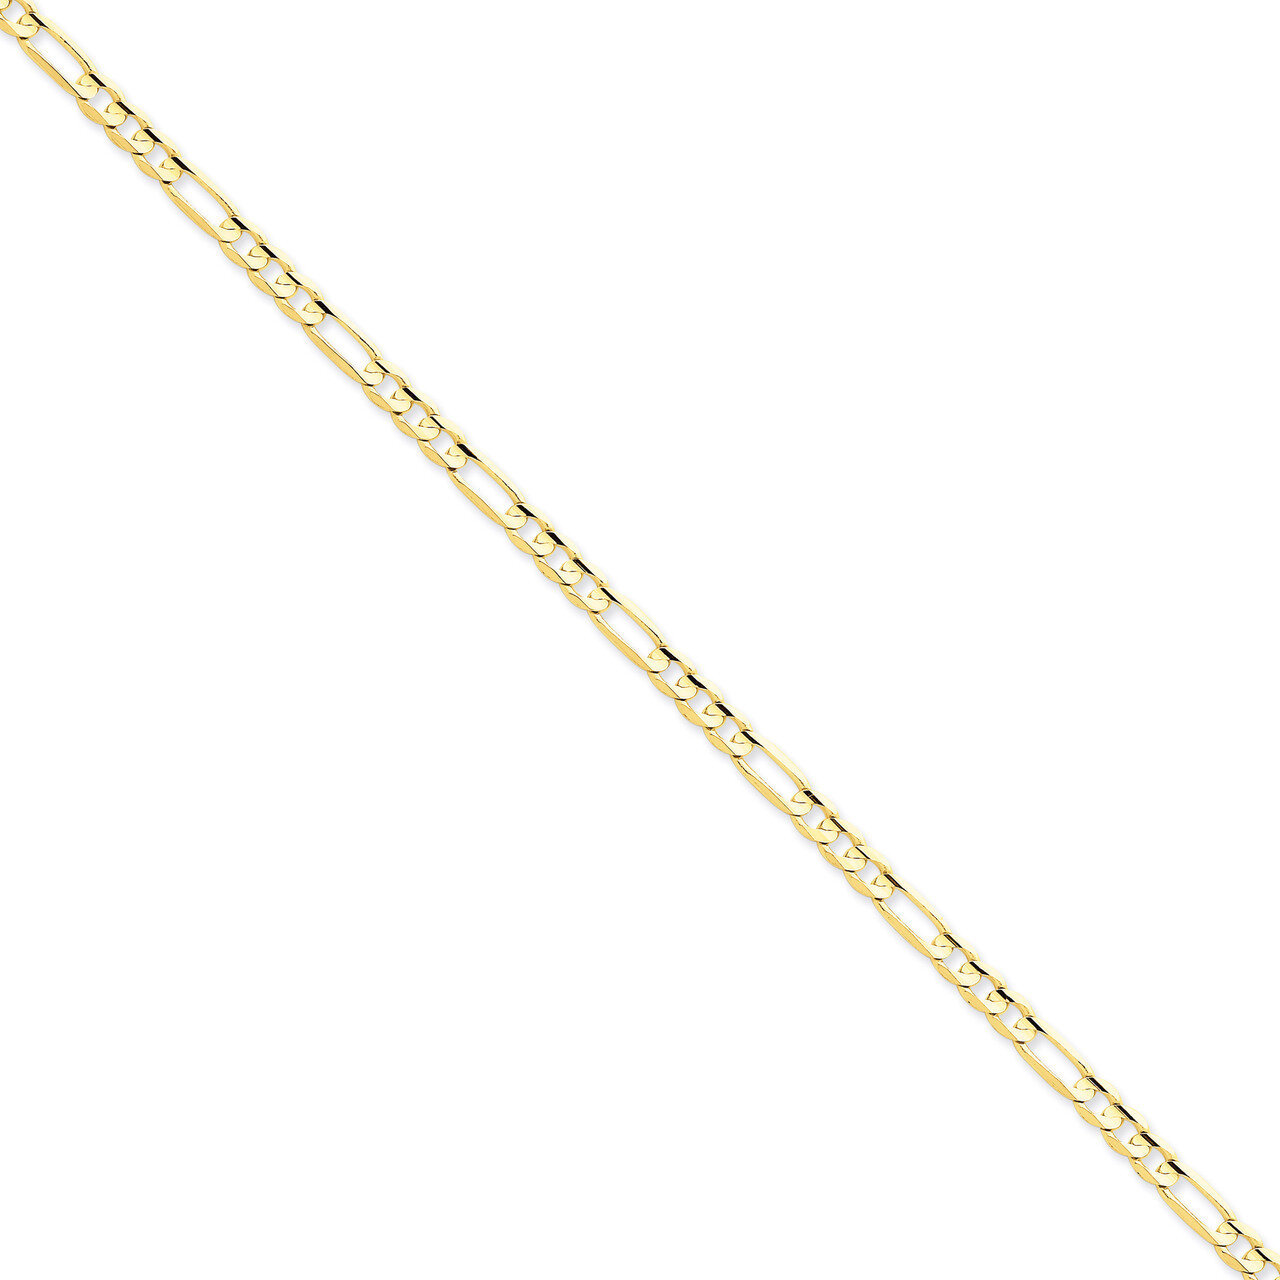 4.5mm Concave Open Figaro Chain 7 Inch 14k Gold LFG120-7